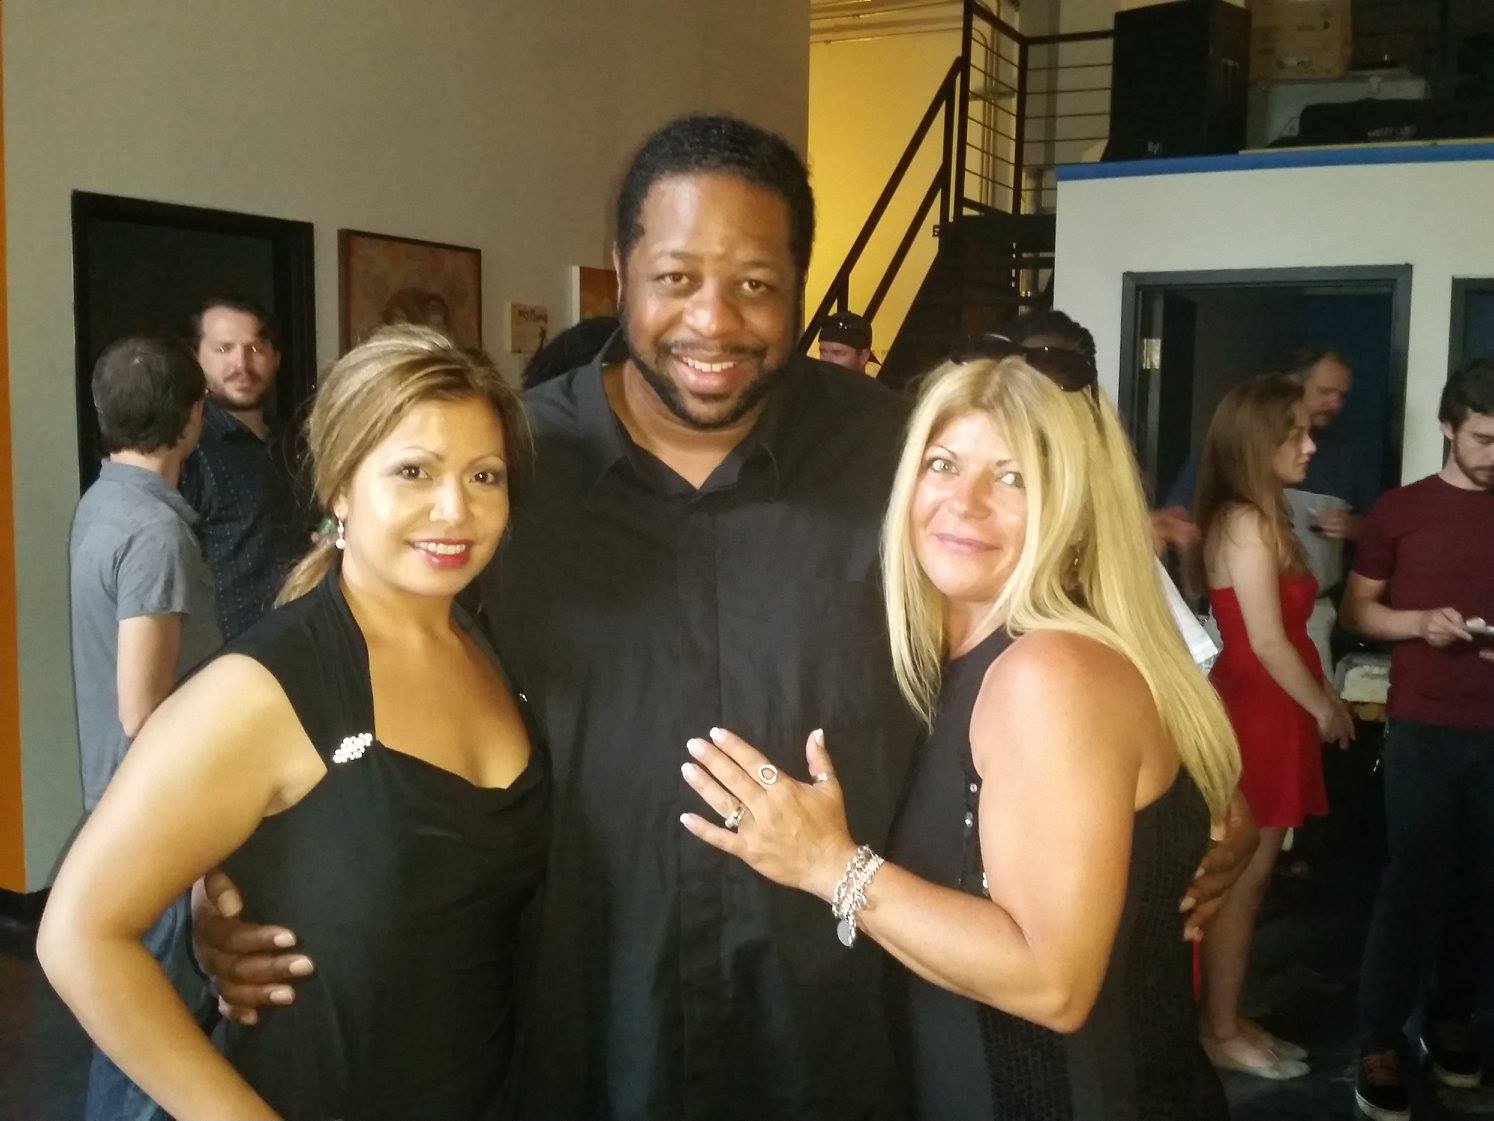 Alinda Harr (Actress) Ken Anthony II (Actor/ Director/ Producer/ Writer/ Artist and Founder of Artistic License Studio) and Joanne Marinho (Actress) at 